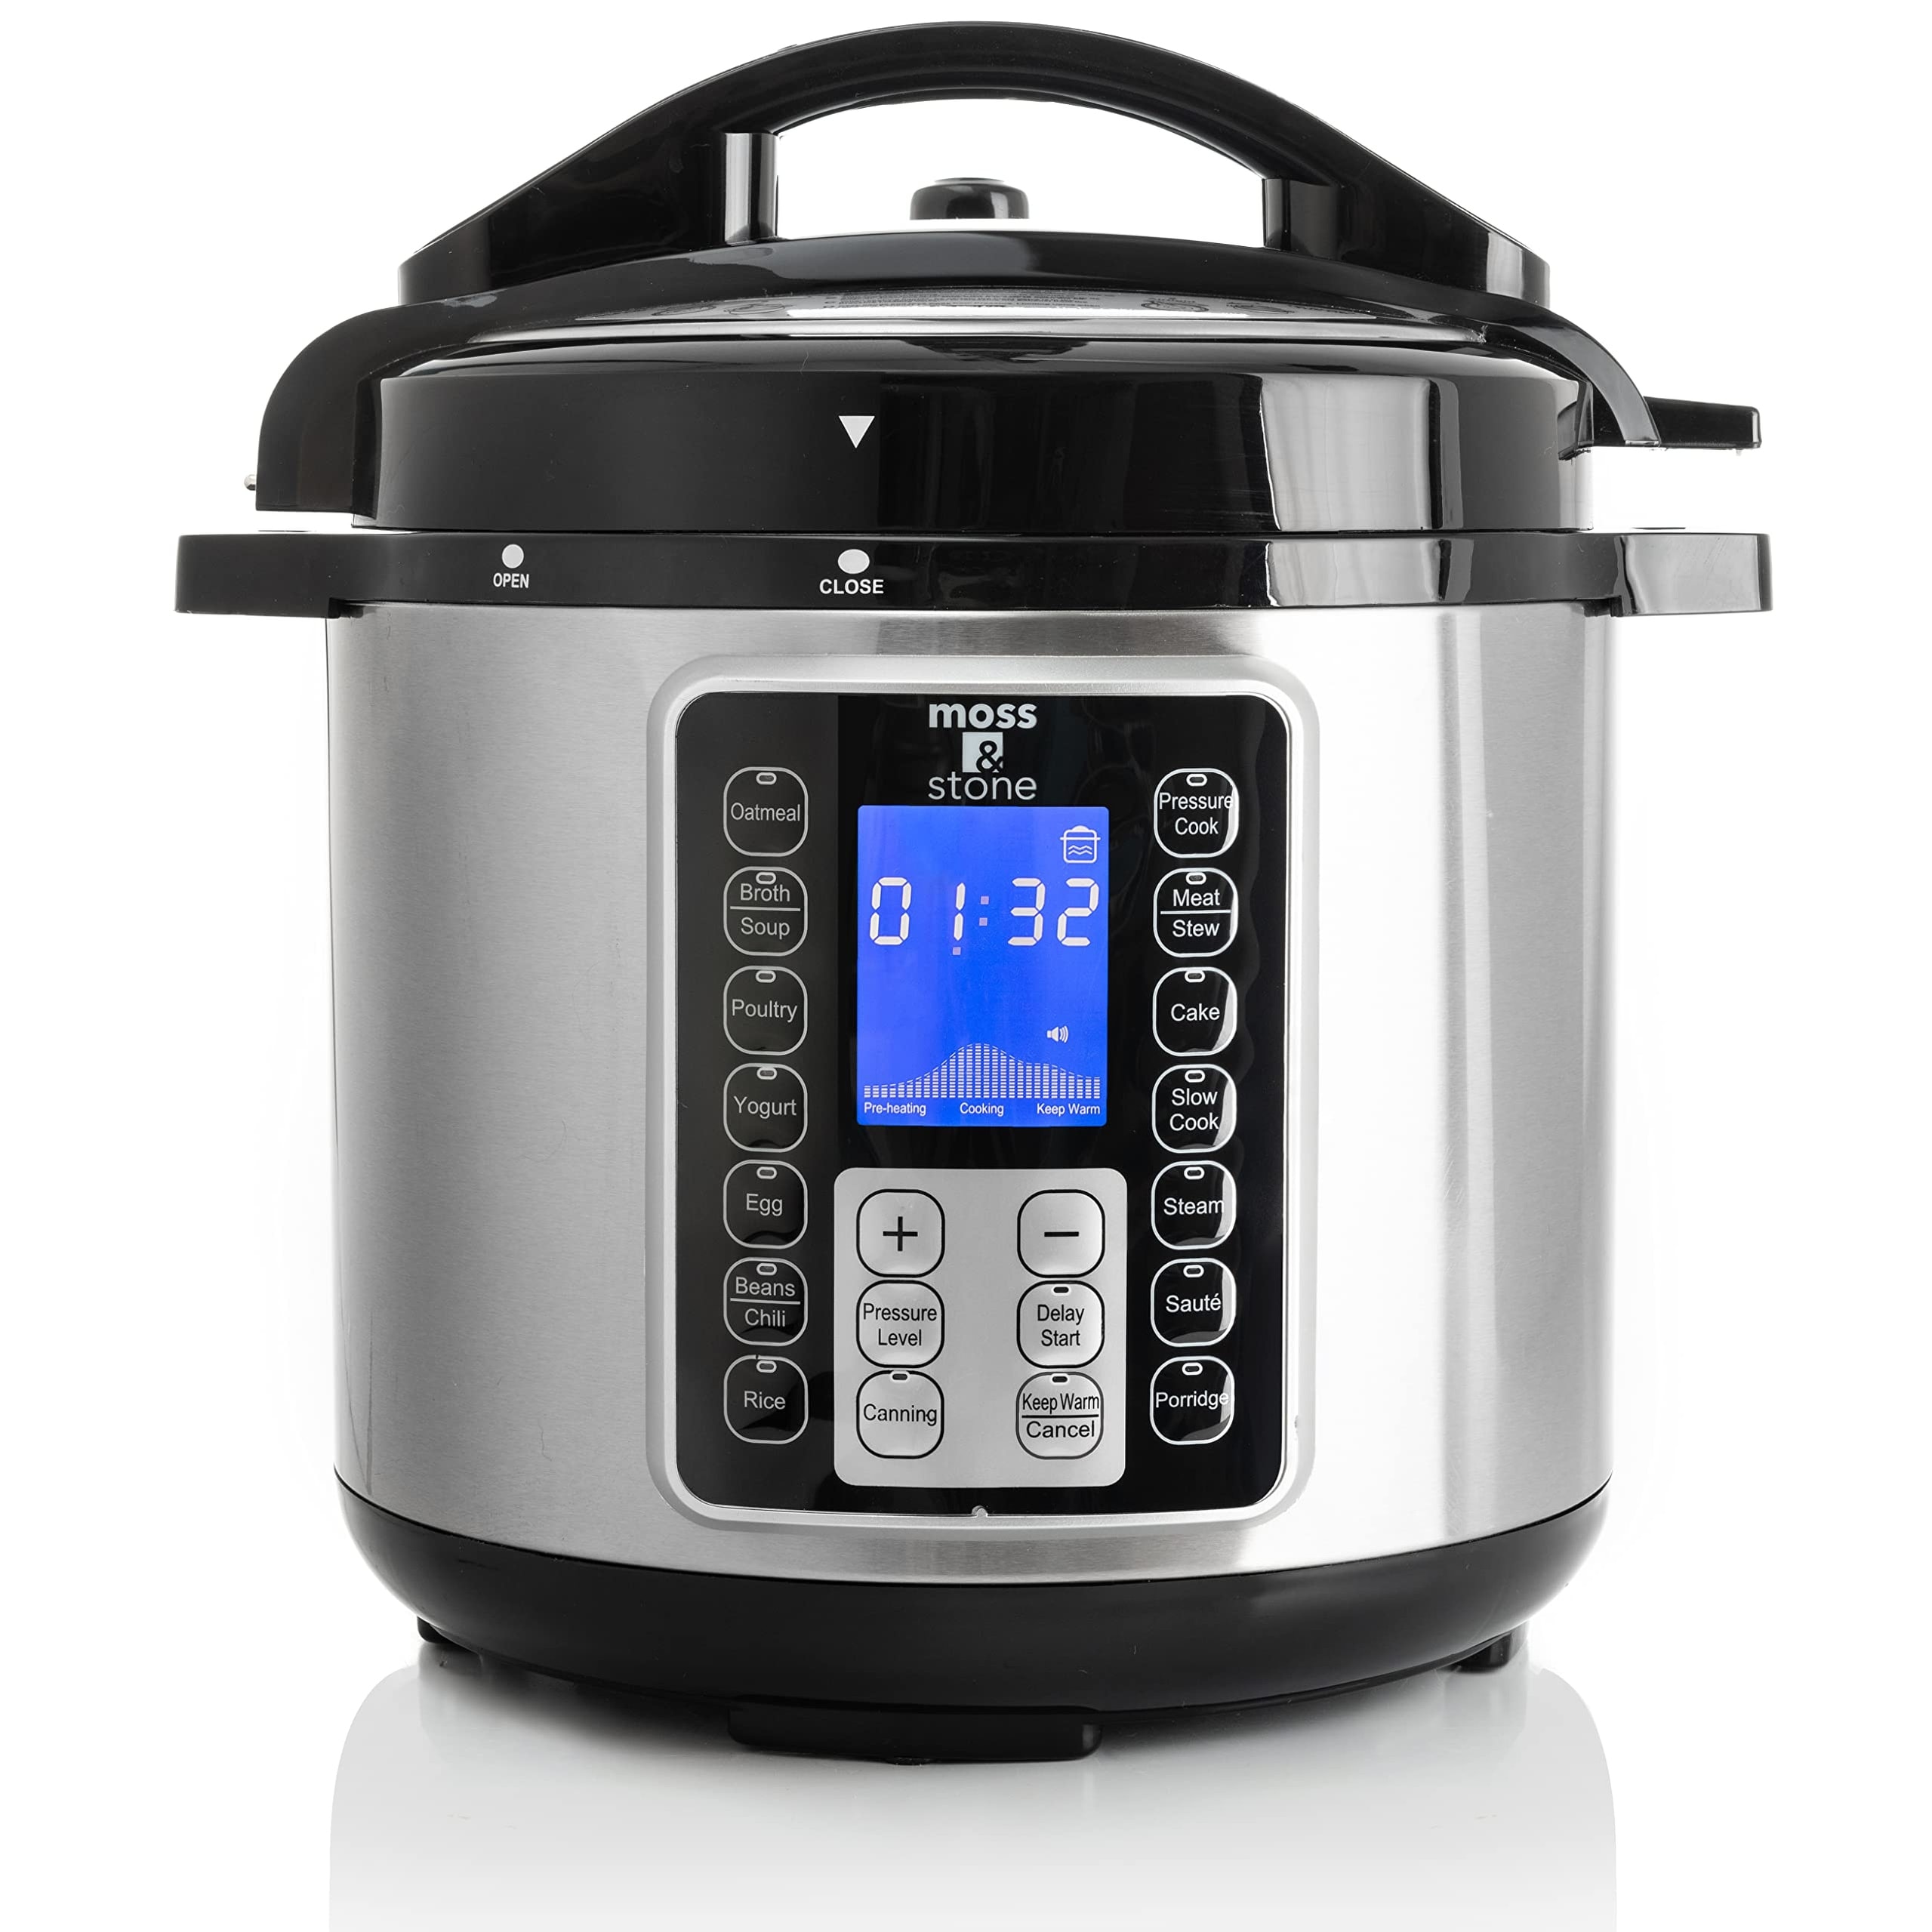 Salton Stainless Steel Rice Cooker and Steamer, One Touch Automatic Cooking, Steaming Basket Included, Easy to Clean